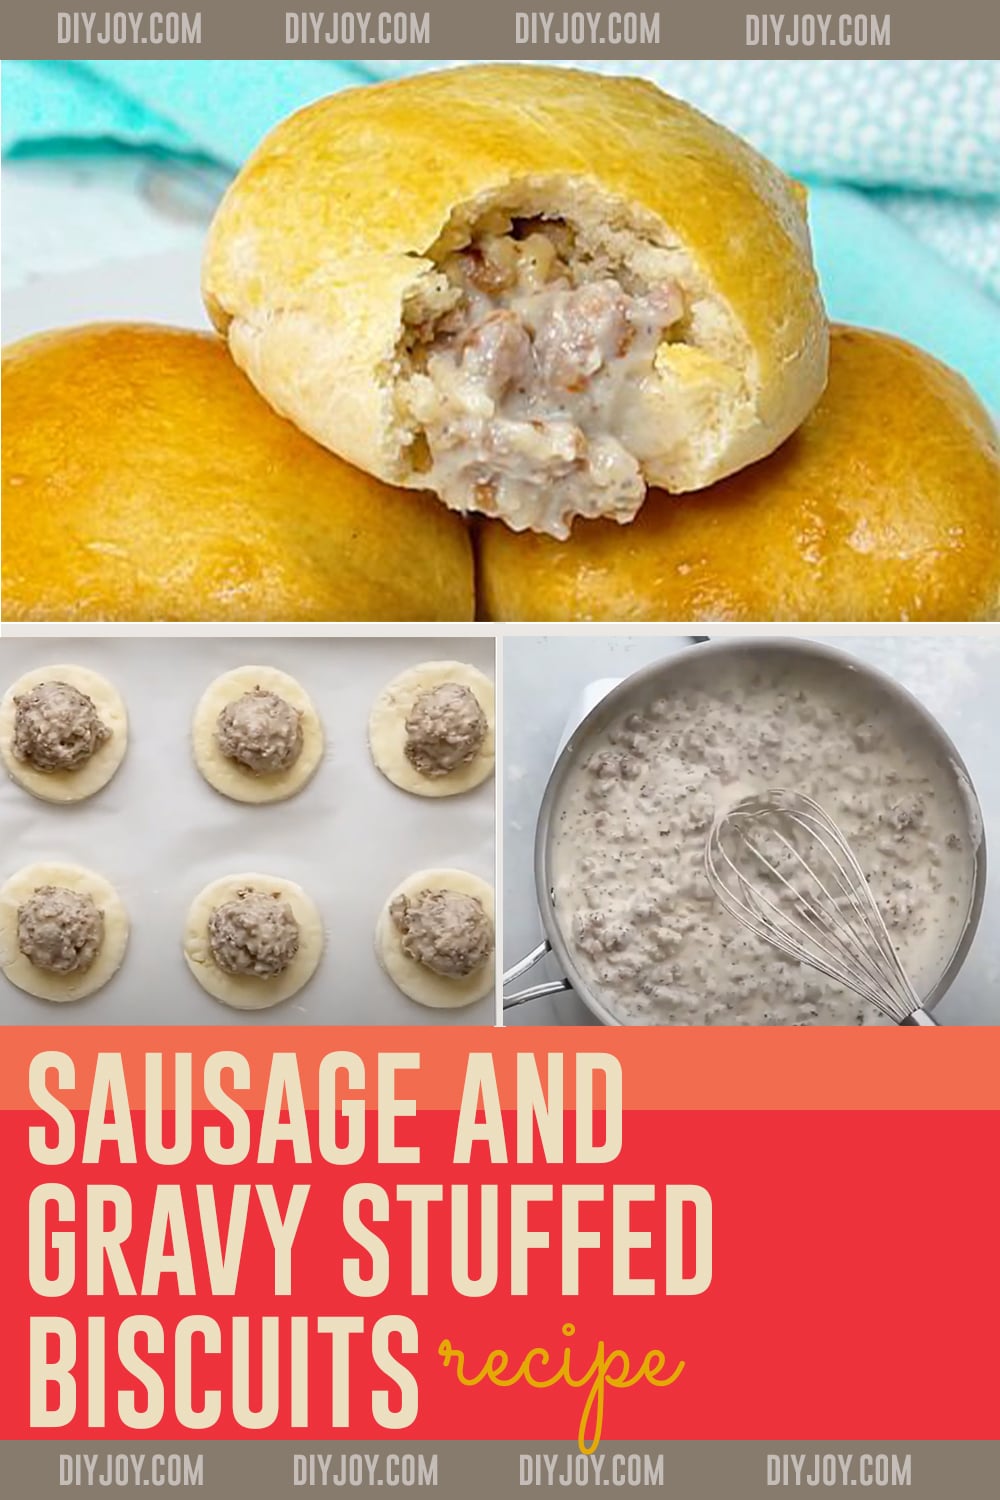 Sausage Gravy Stuffed Biscuit Recipe - Easy Breakfast Ideas for Country Cooking - How to Make Stuffed Biscuits